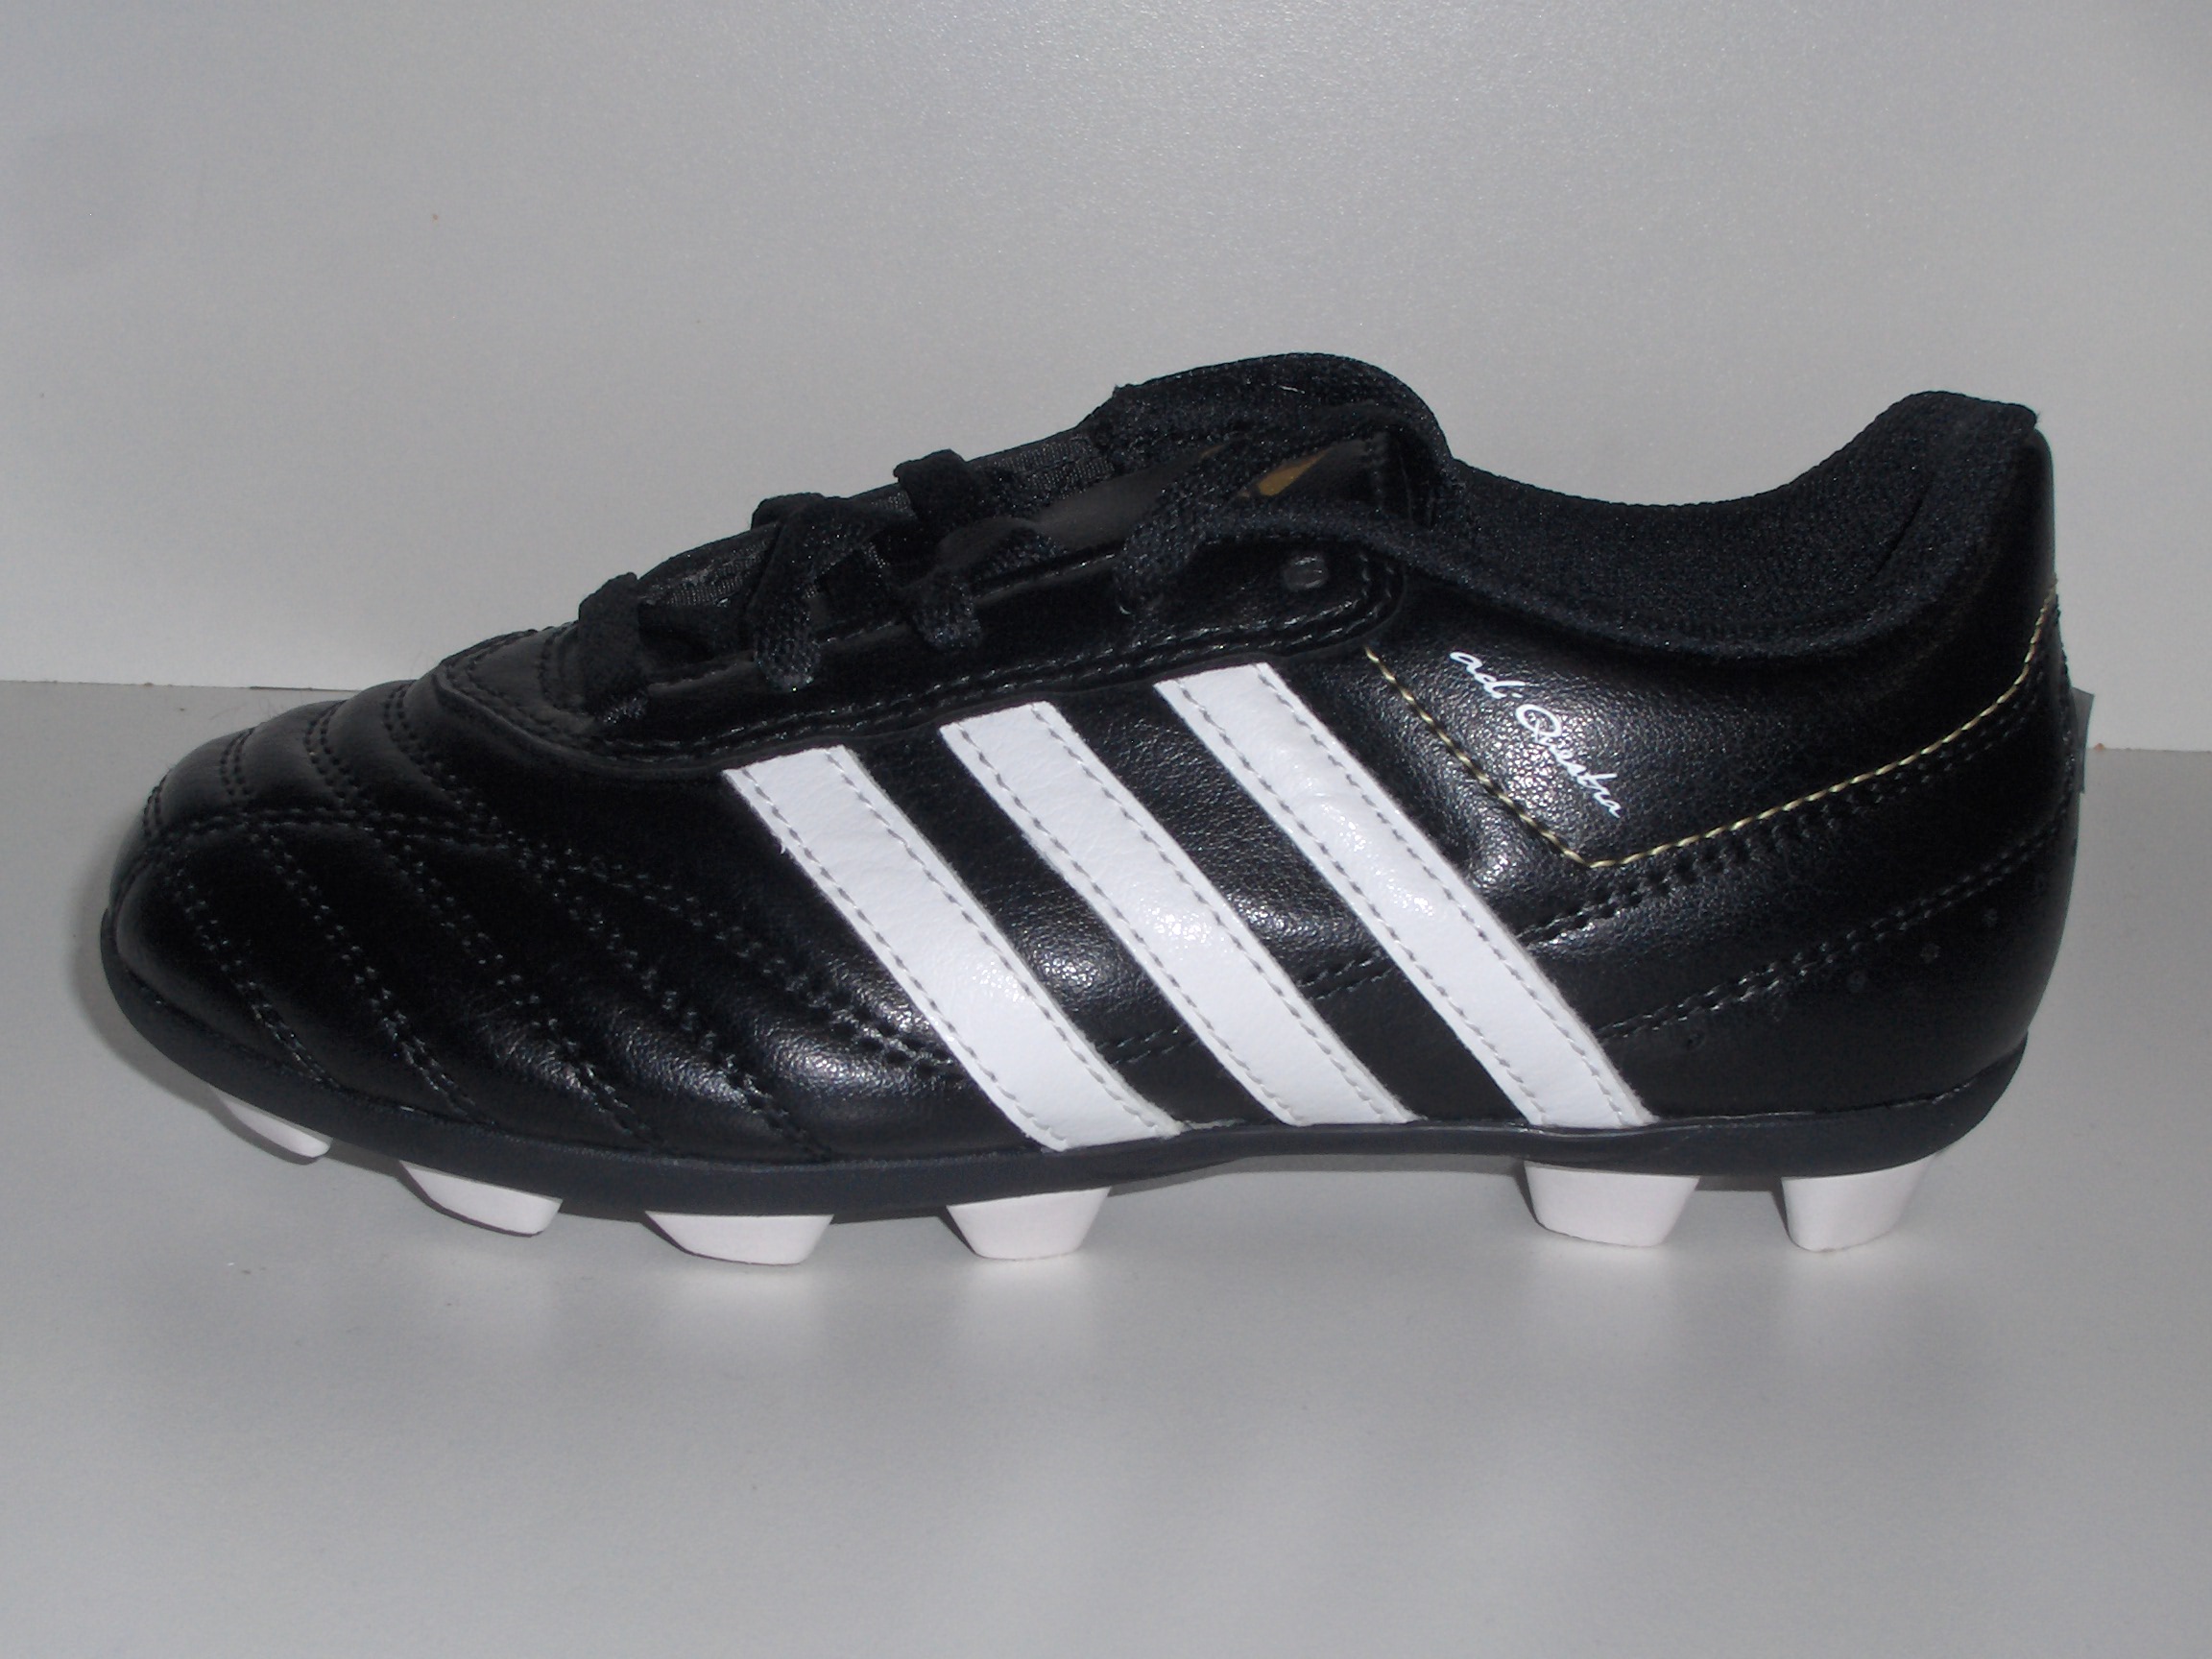 adidas kids soccer shoes